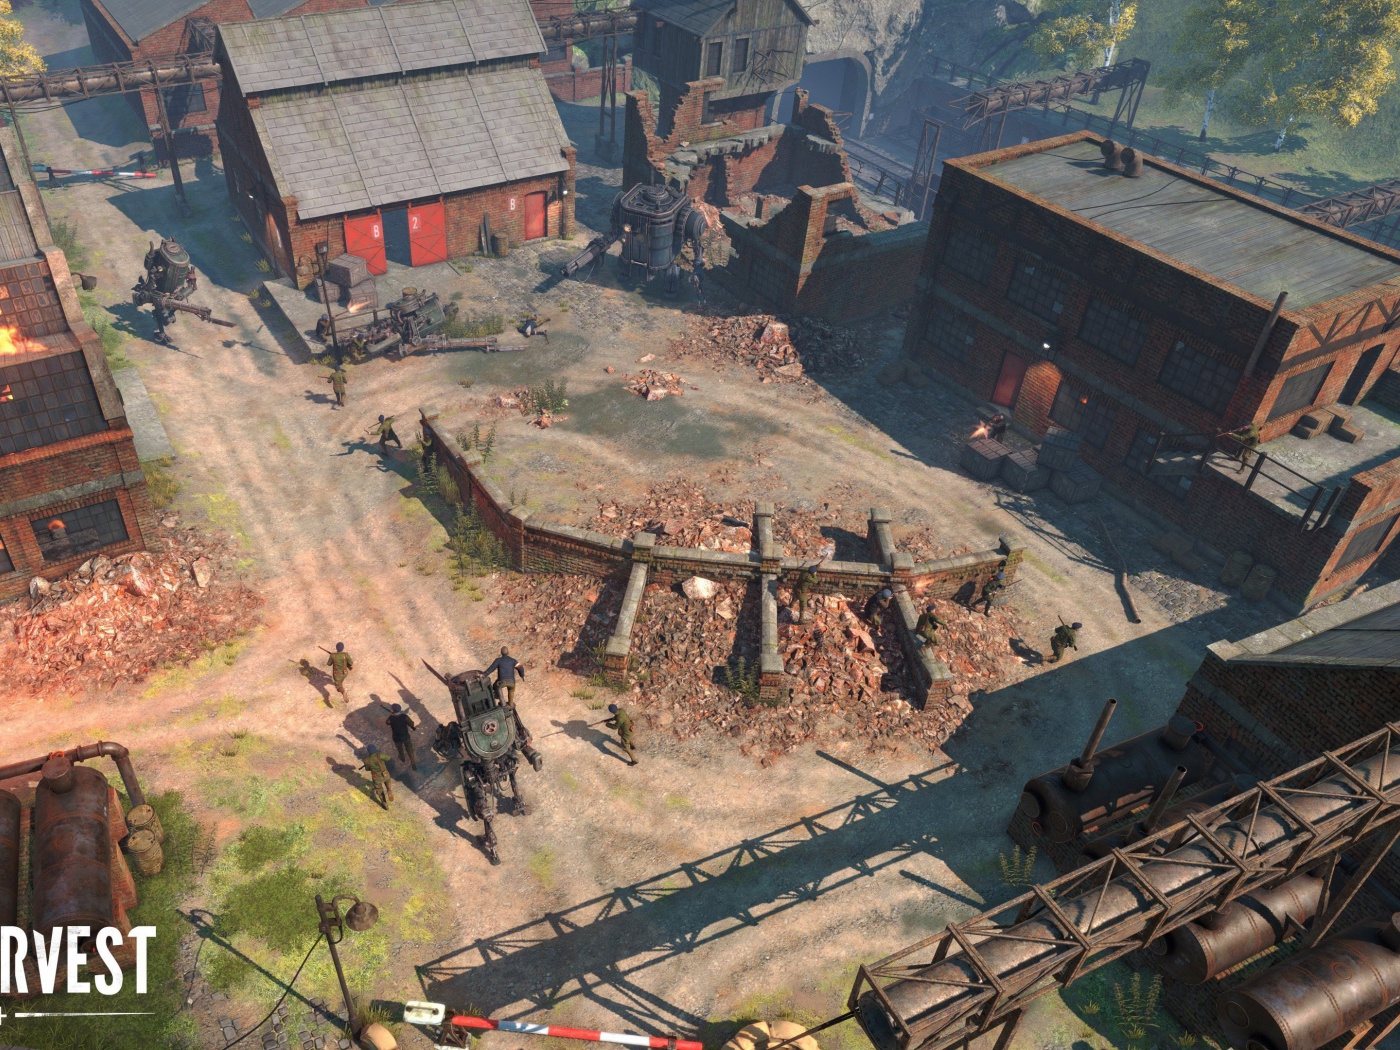 Screenshot of the computer game Iron Harvest